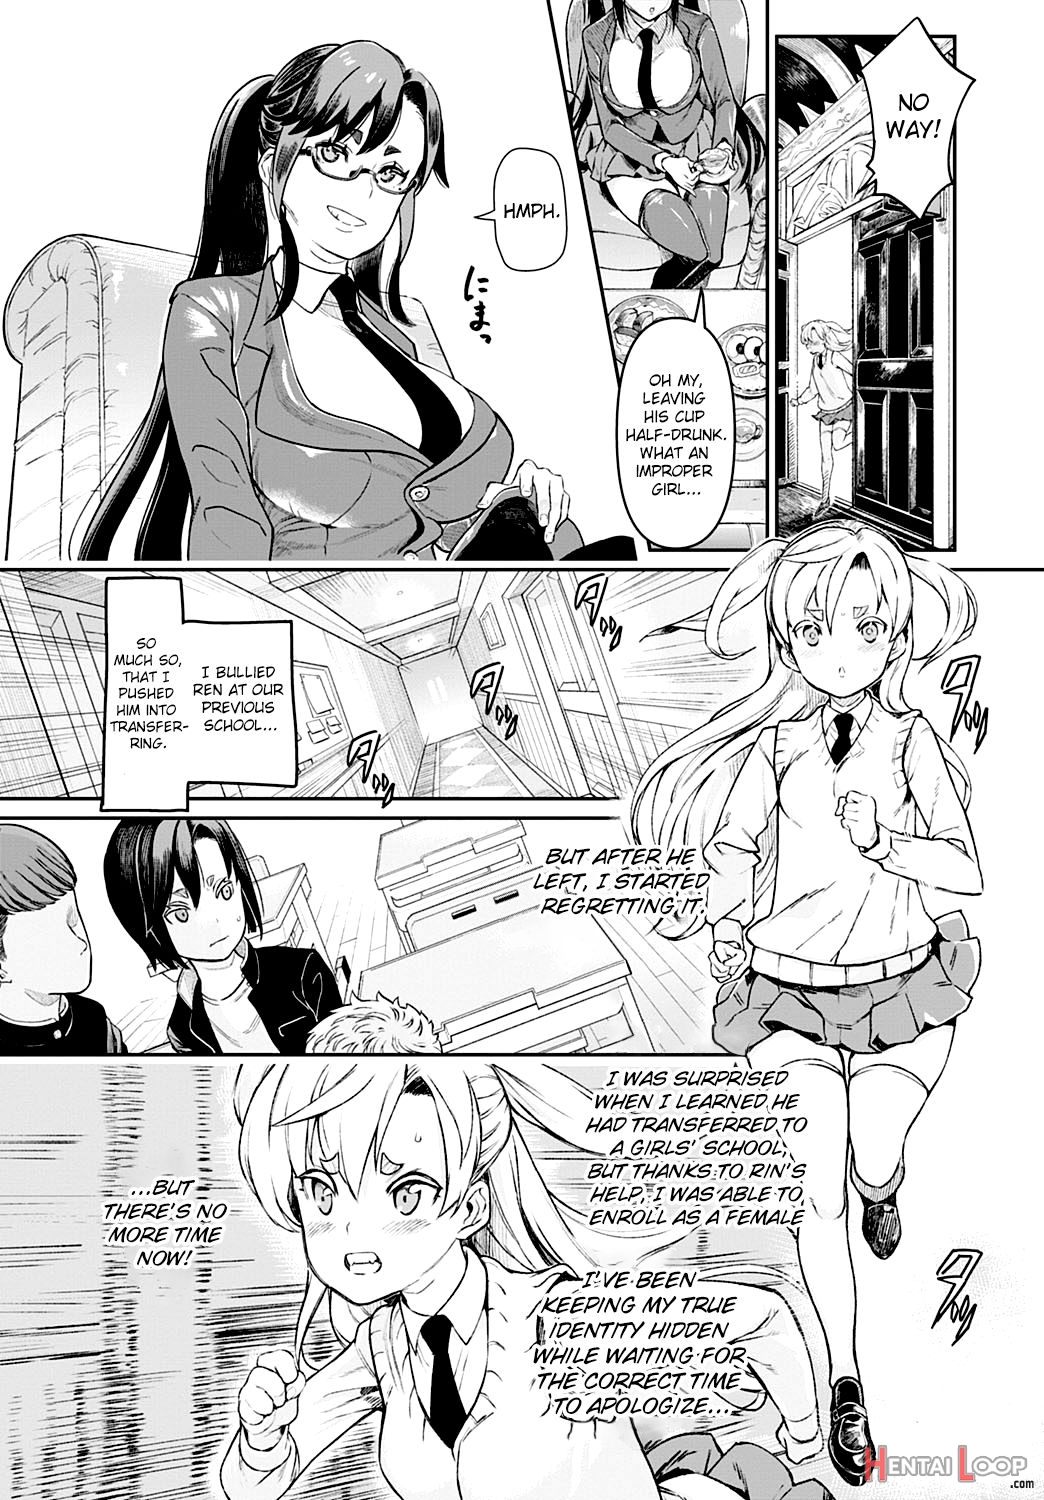 The Student Council President’s Secret 8 page 2